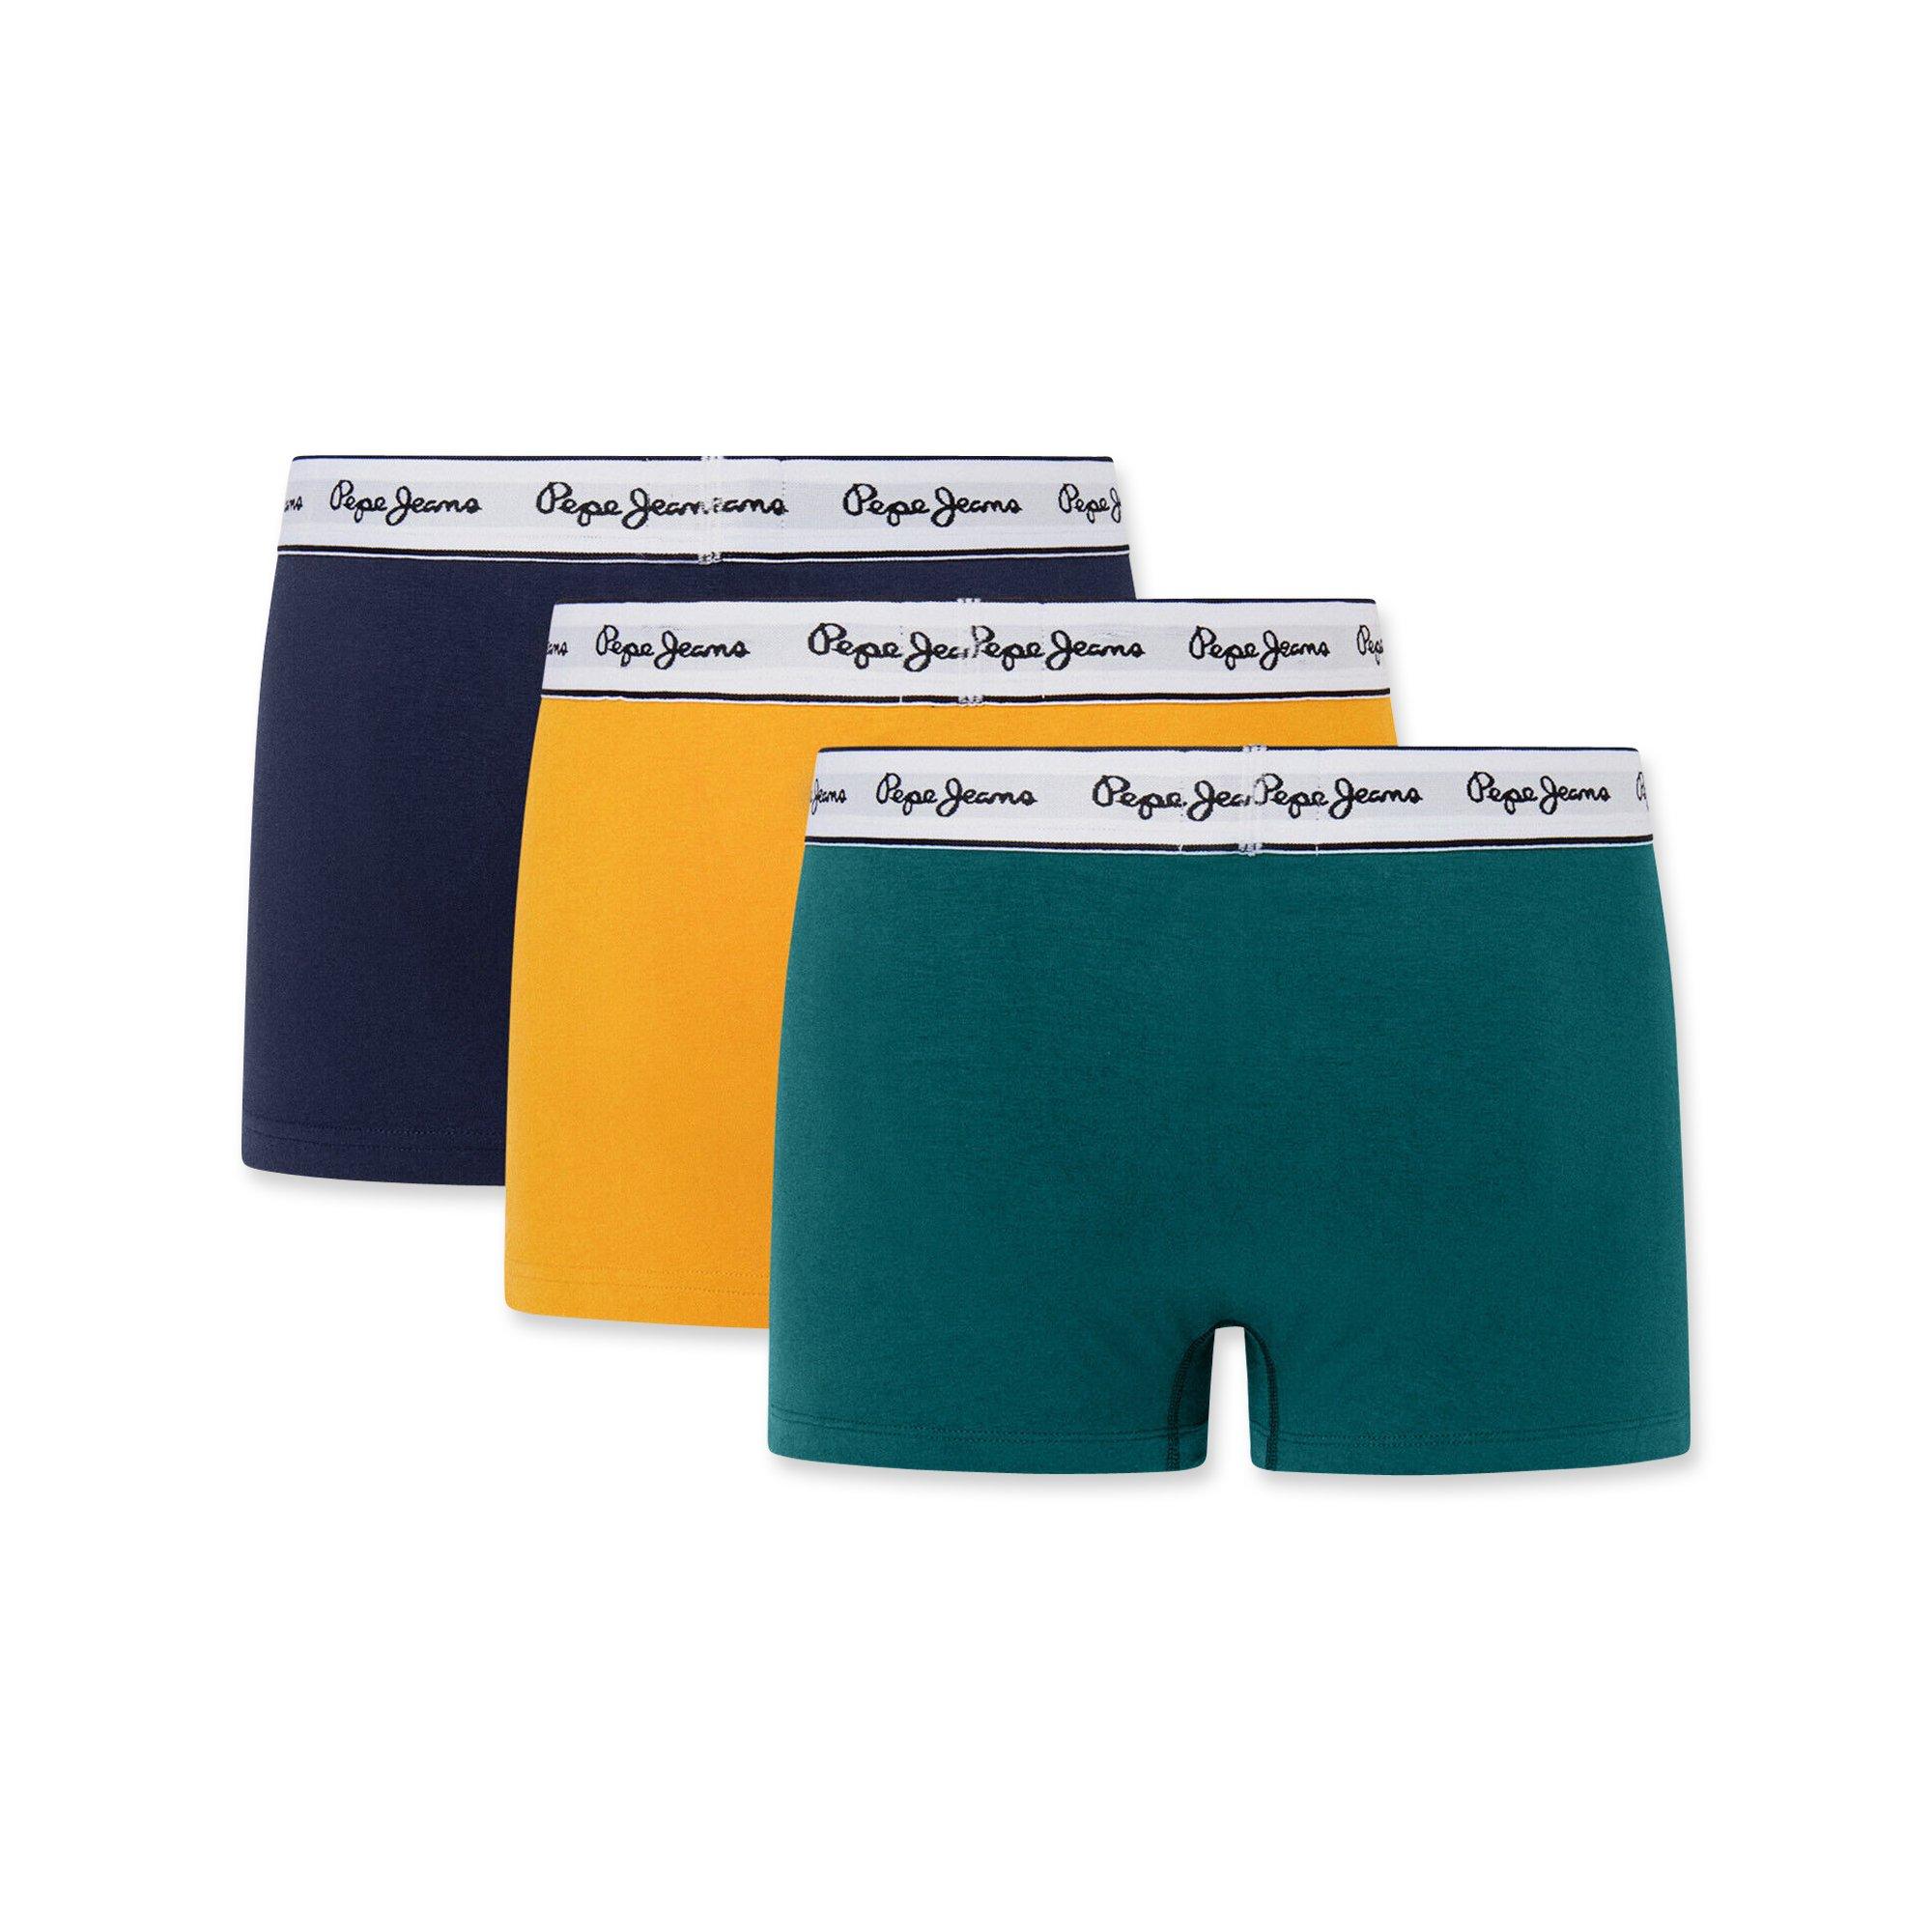 Pepe Jeans SOLID TK 3P Culotte, 3-pack 